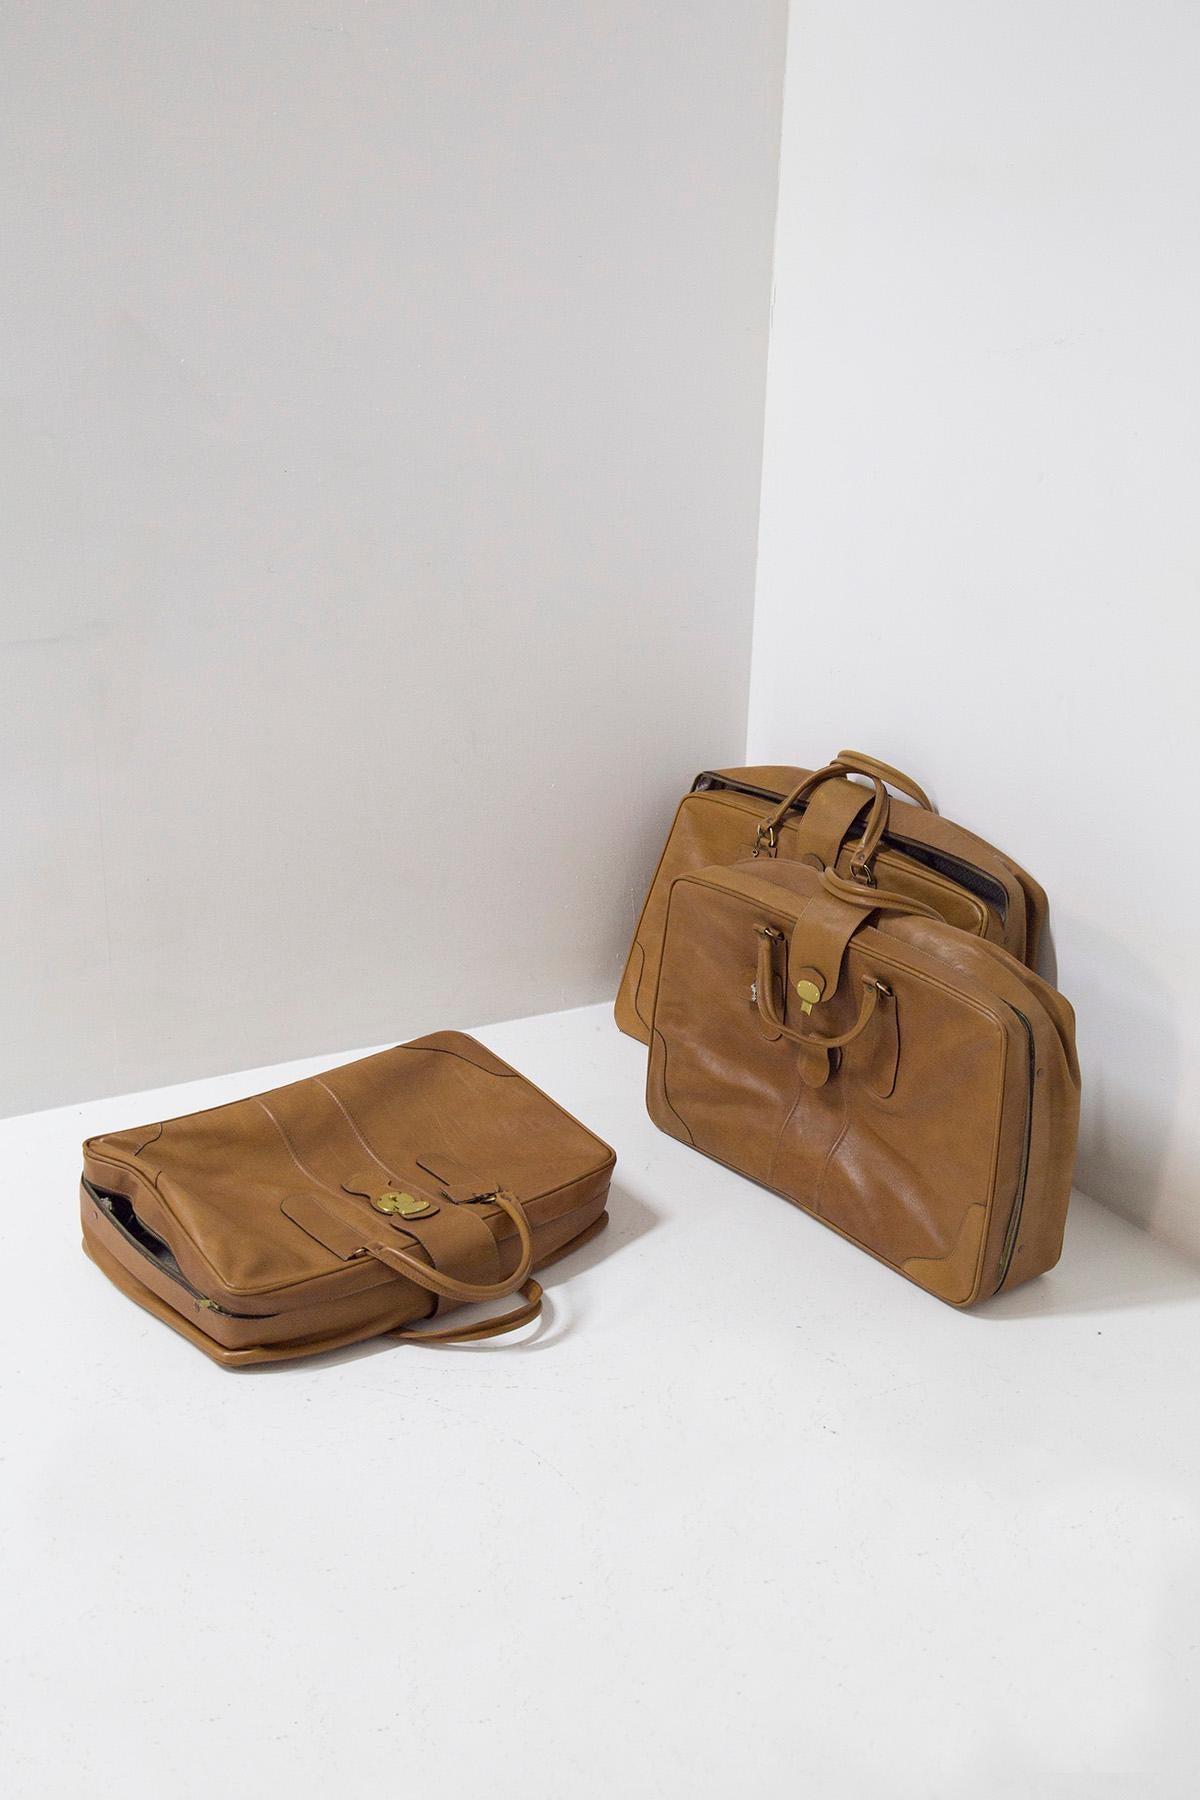 Nice set of three camel-coloured leather suitcases, made in the 1970s in Italy.
The set consists of three suitcases of different sizes: one larger, one medium-sized and one smaller. The suitcases are made entirely of soft, beautiful camel-coloured